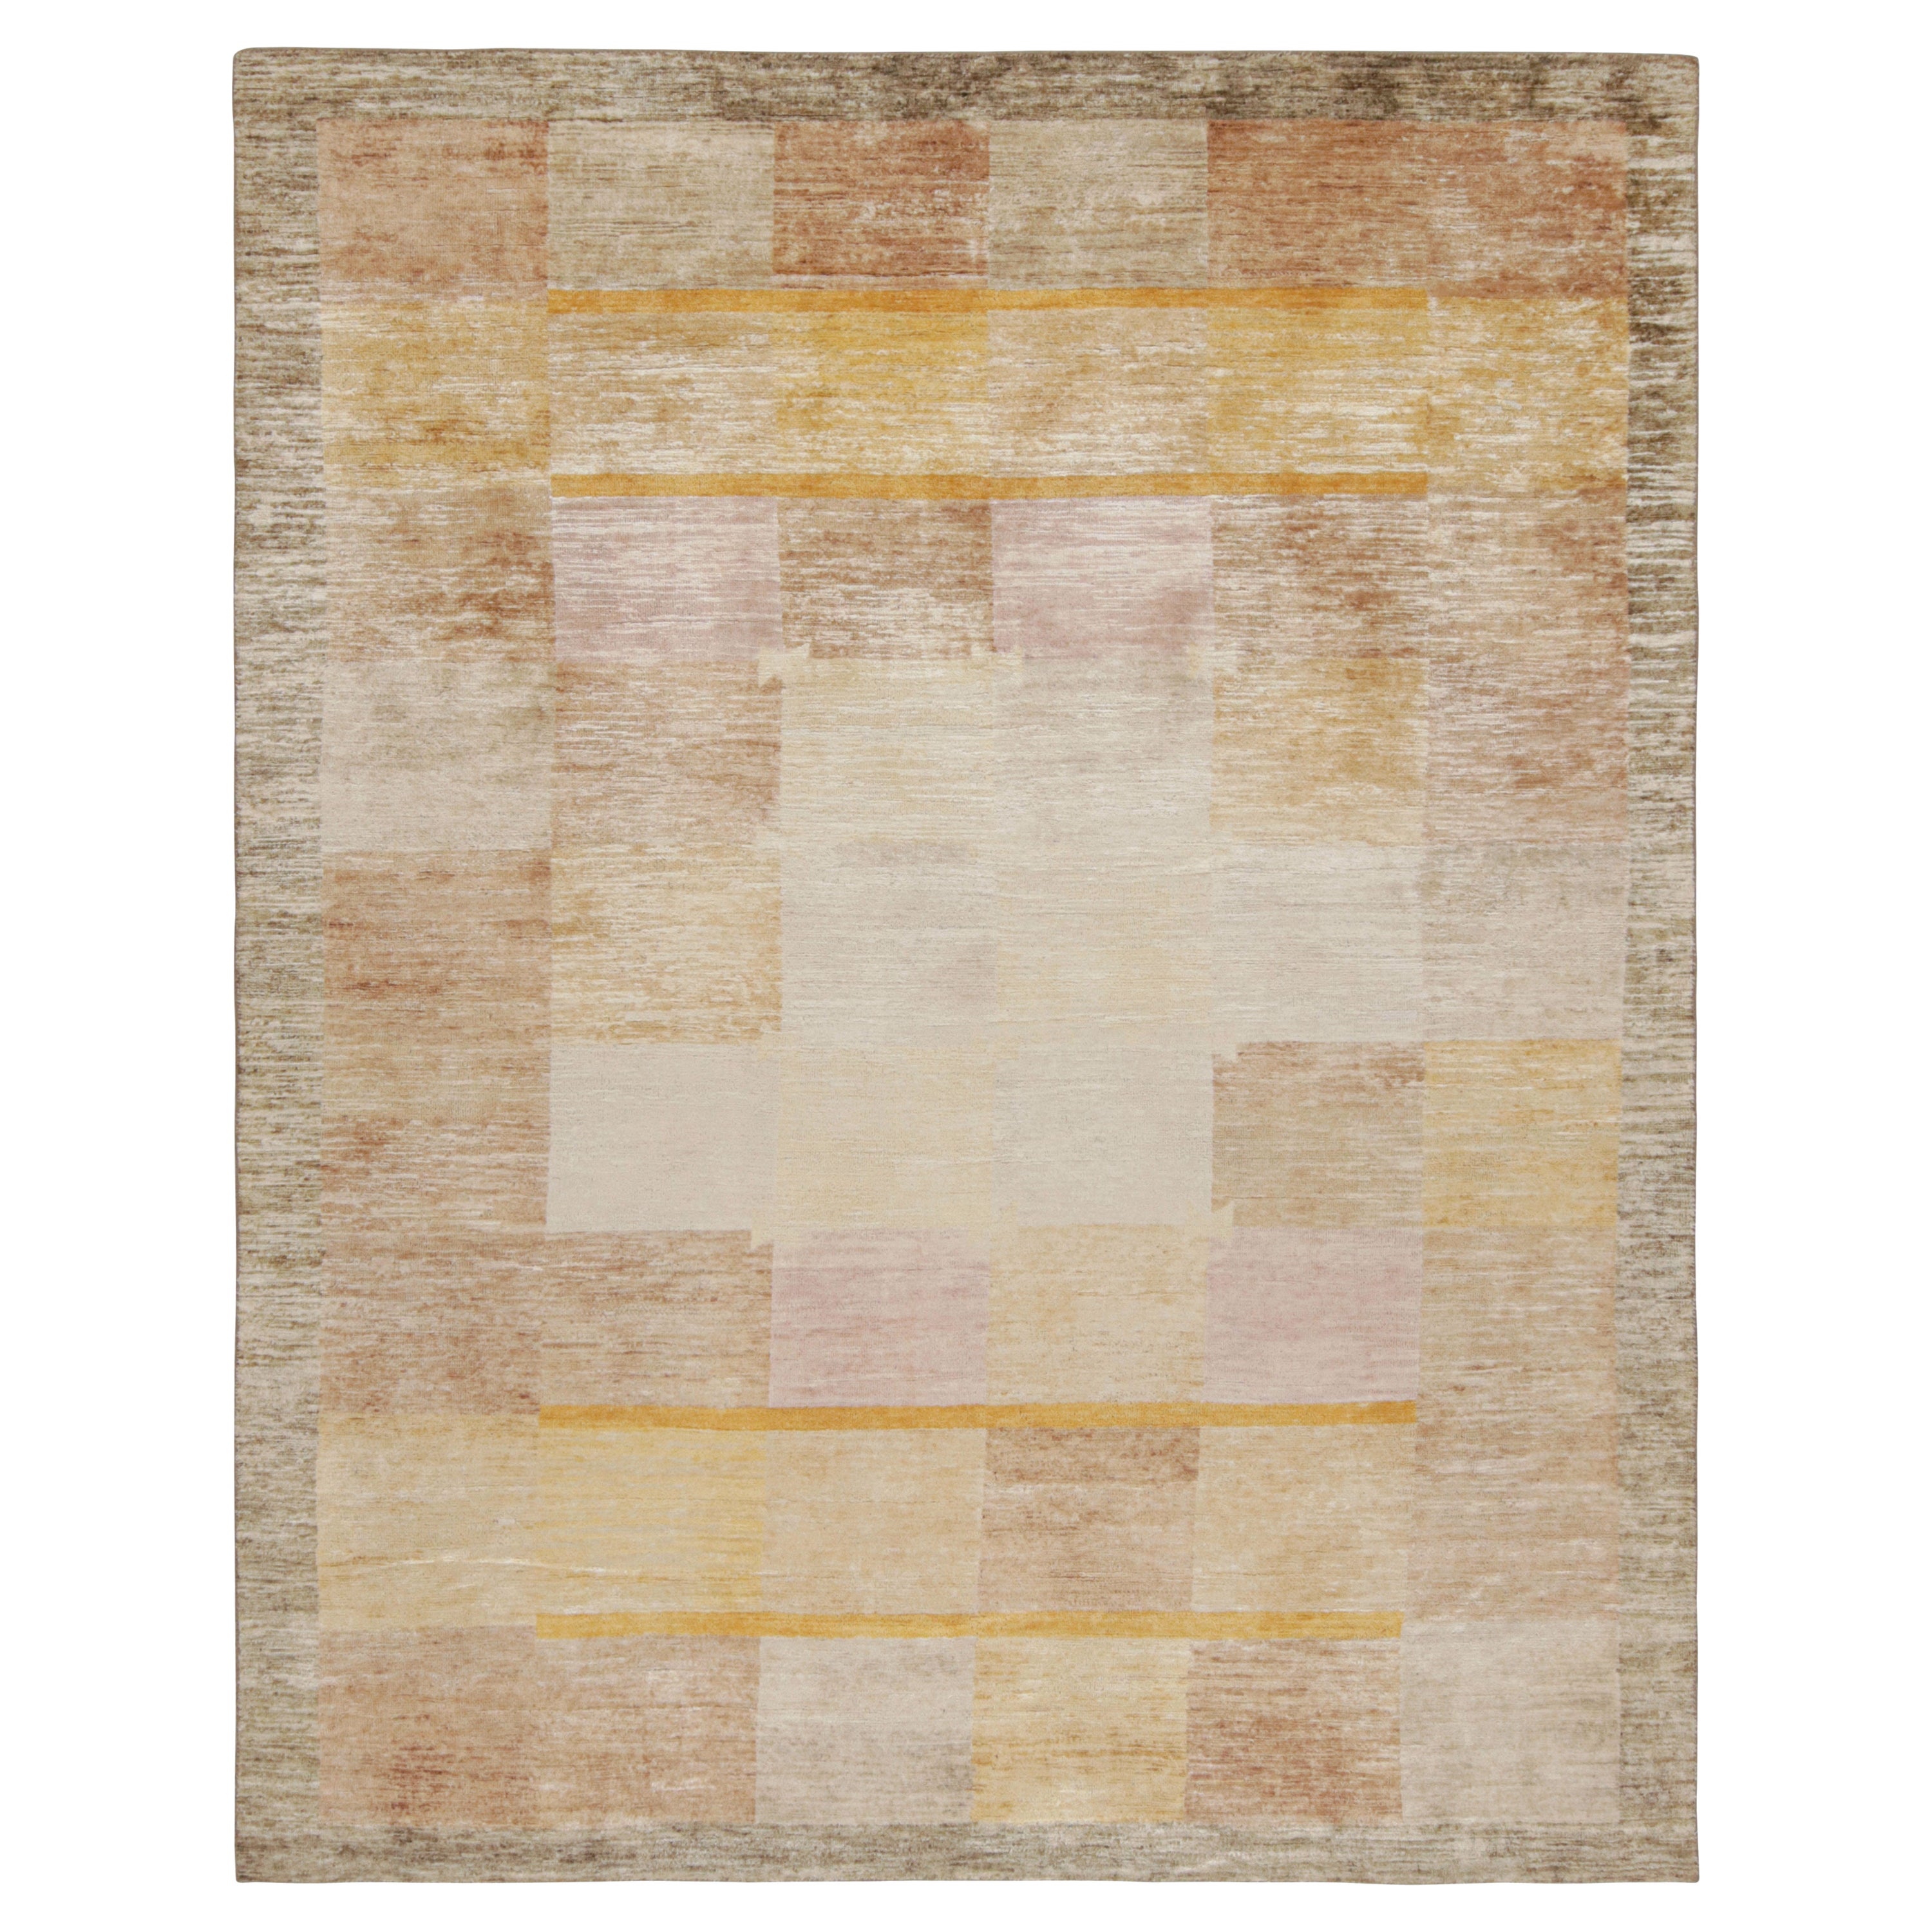 Rug & Kilim’s Scandinavian Style Rug in Gold and Beige-Brown Geometric Patterns For Sale